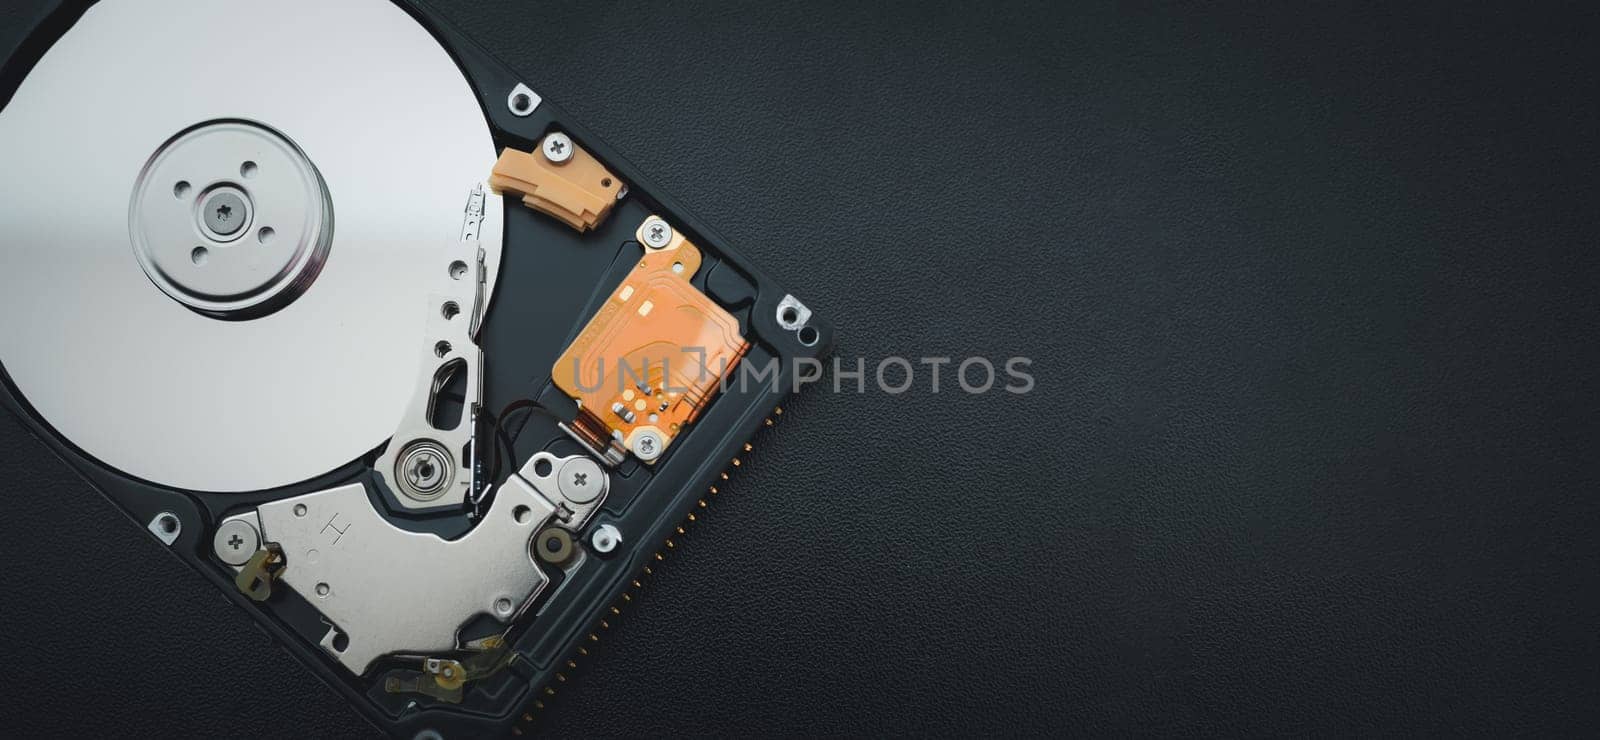 Disassembled open hard disk drive HDD of computer or laptop lies on dark matte surface. Сomputer hardware and equipment. Harddisk data storage. by Unimages2527